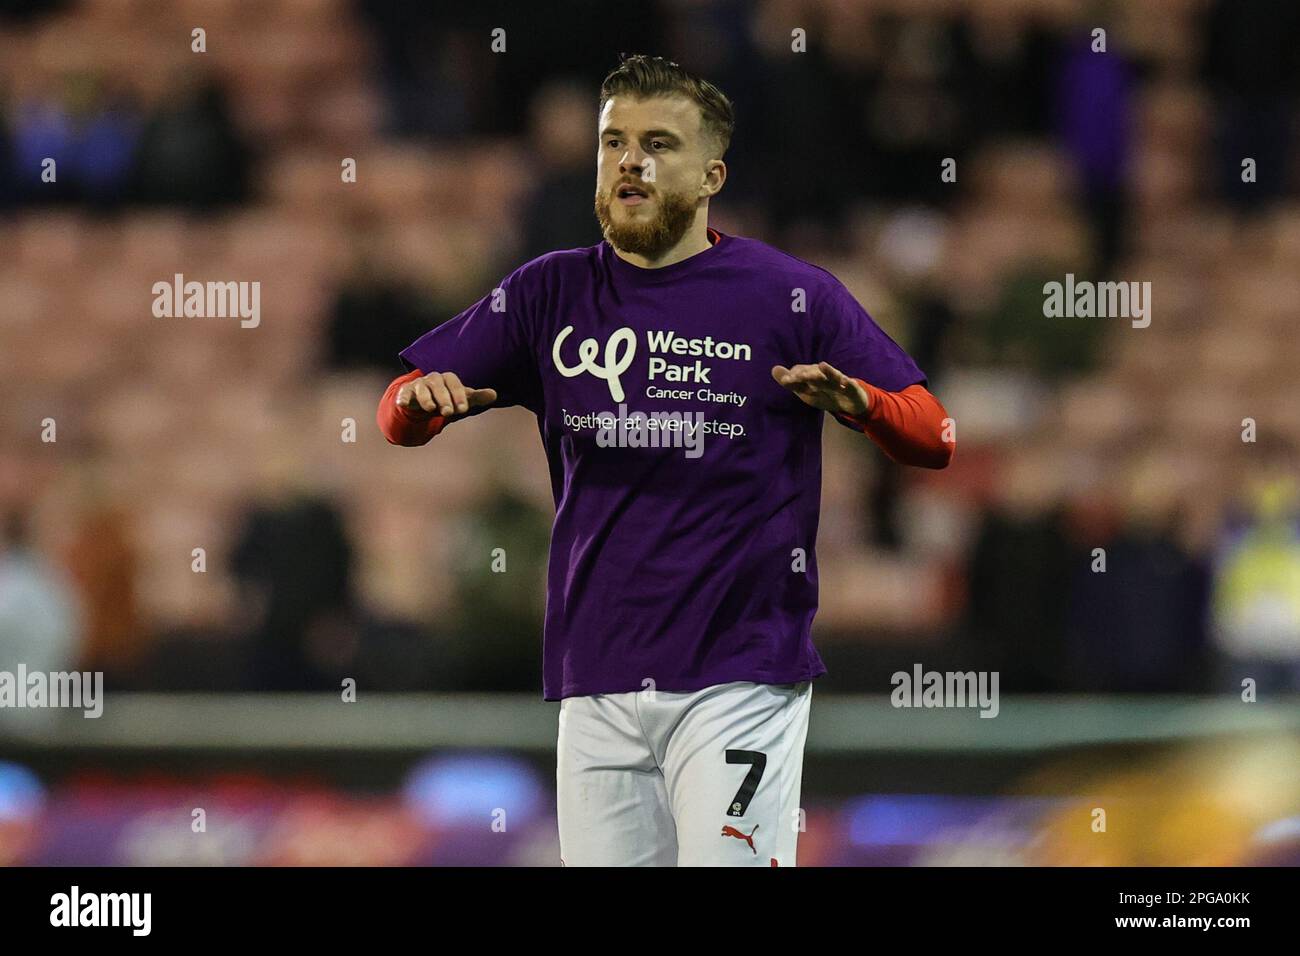 Nicky Cadden #7 of Barnsley in the pregame warmup session during the Sky Bet League 1 match Barnsley vs Sheffield Wednesday at Oakwell, Barnsley, United Kingdom, 21st March 2023  (Photo by Mark Cosgrove/News Images) Stock Photo